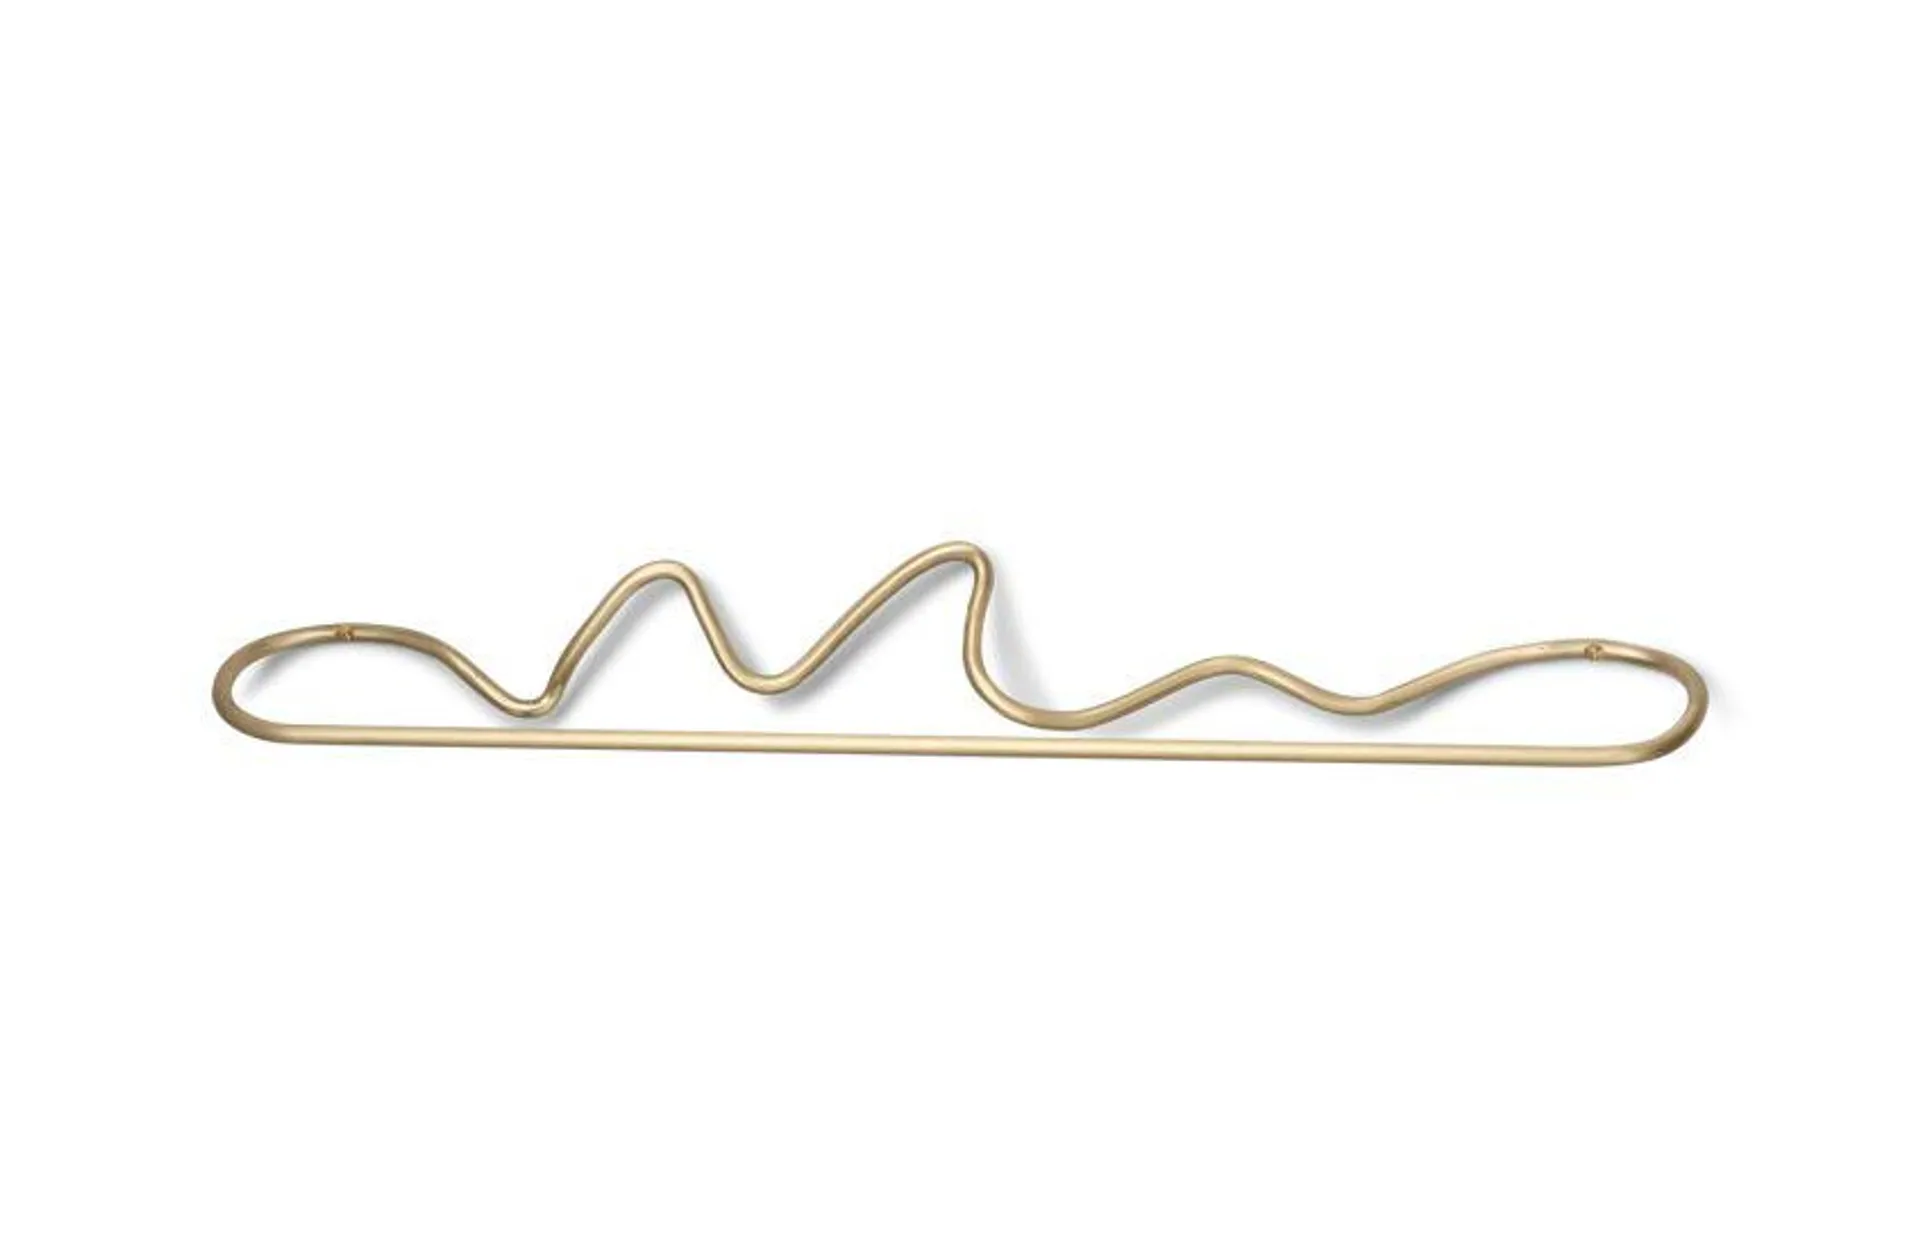 Curvature Wall Mounted Towel Hanger